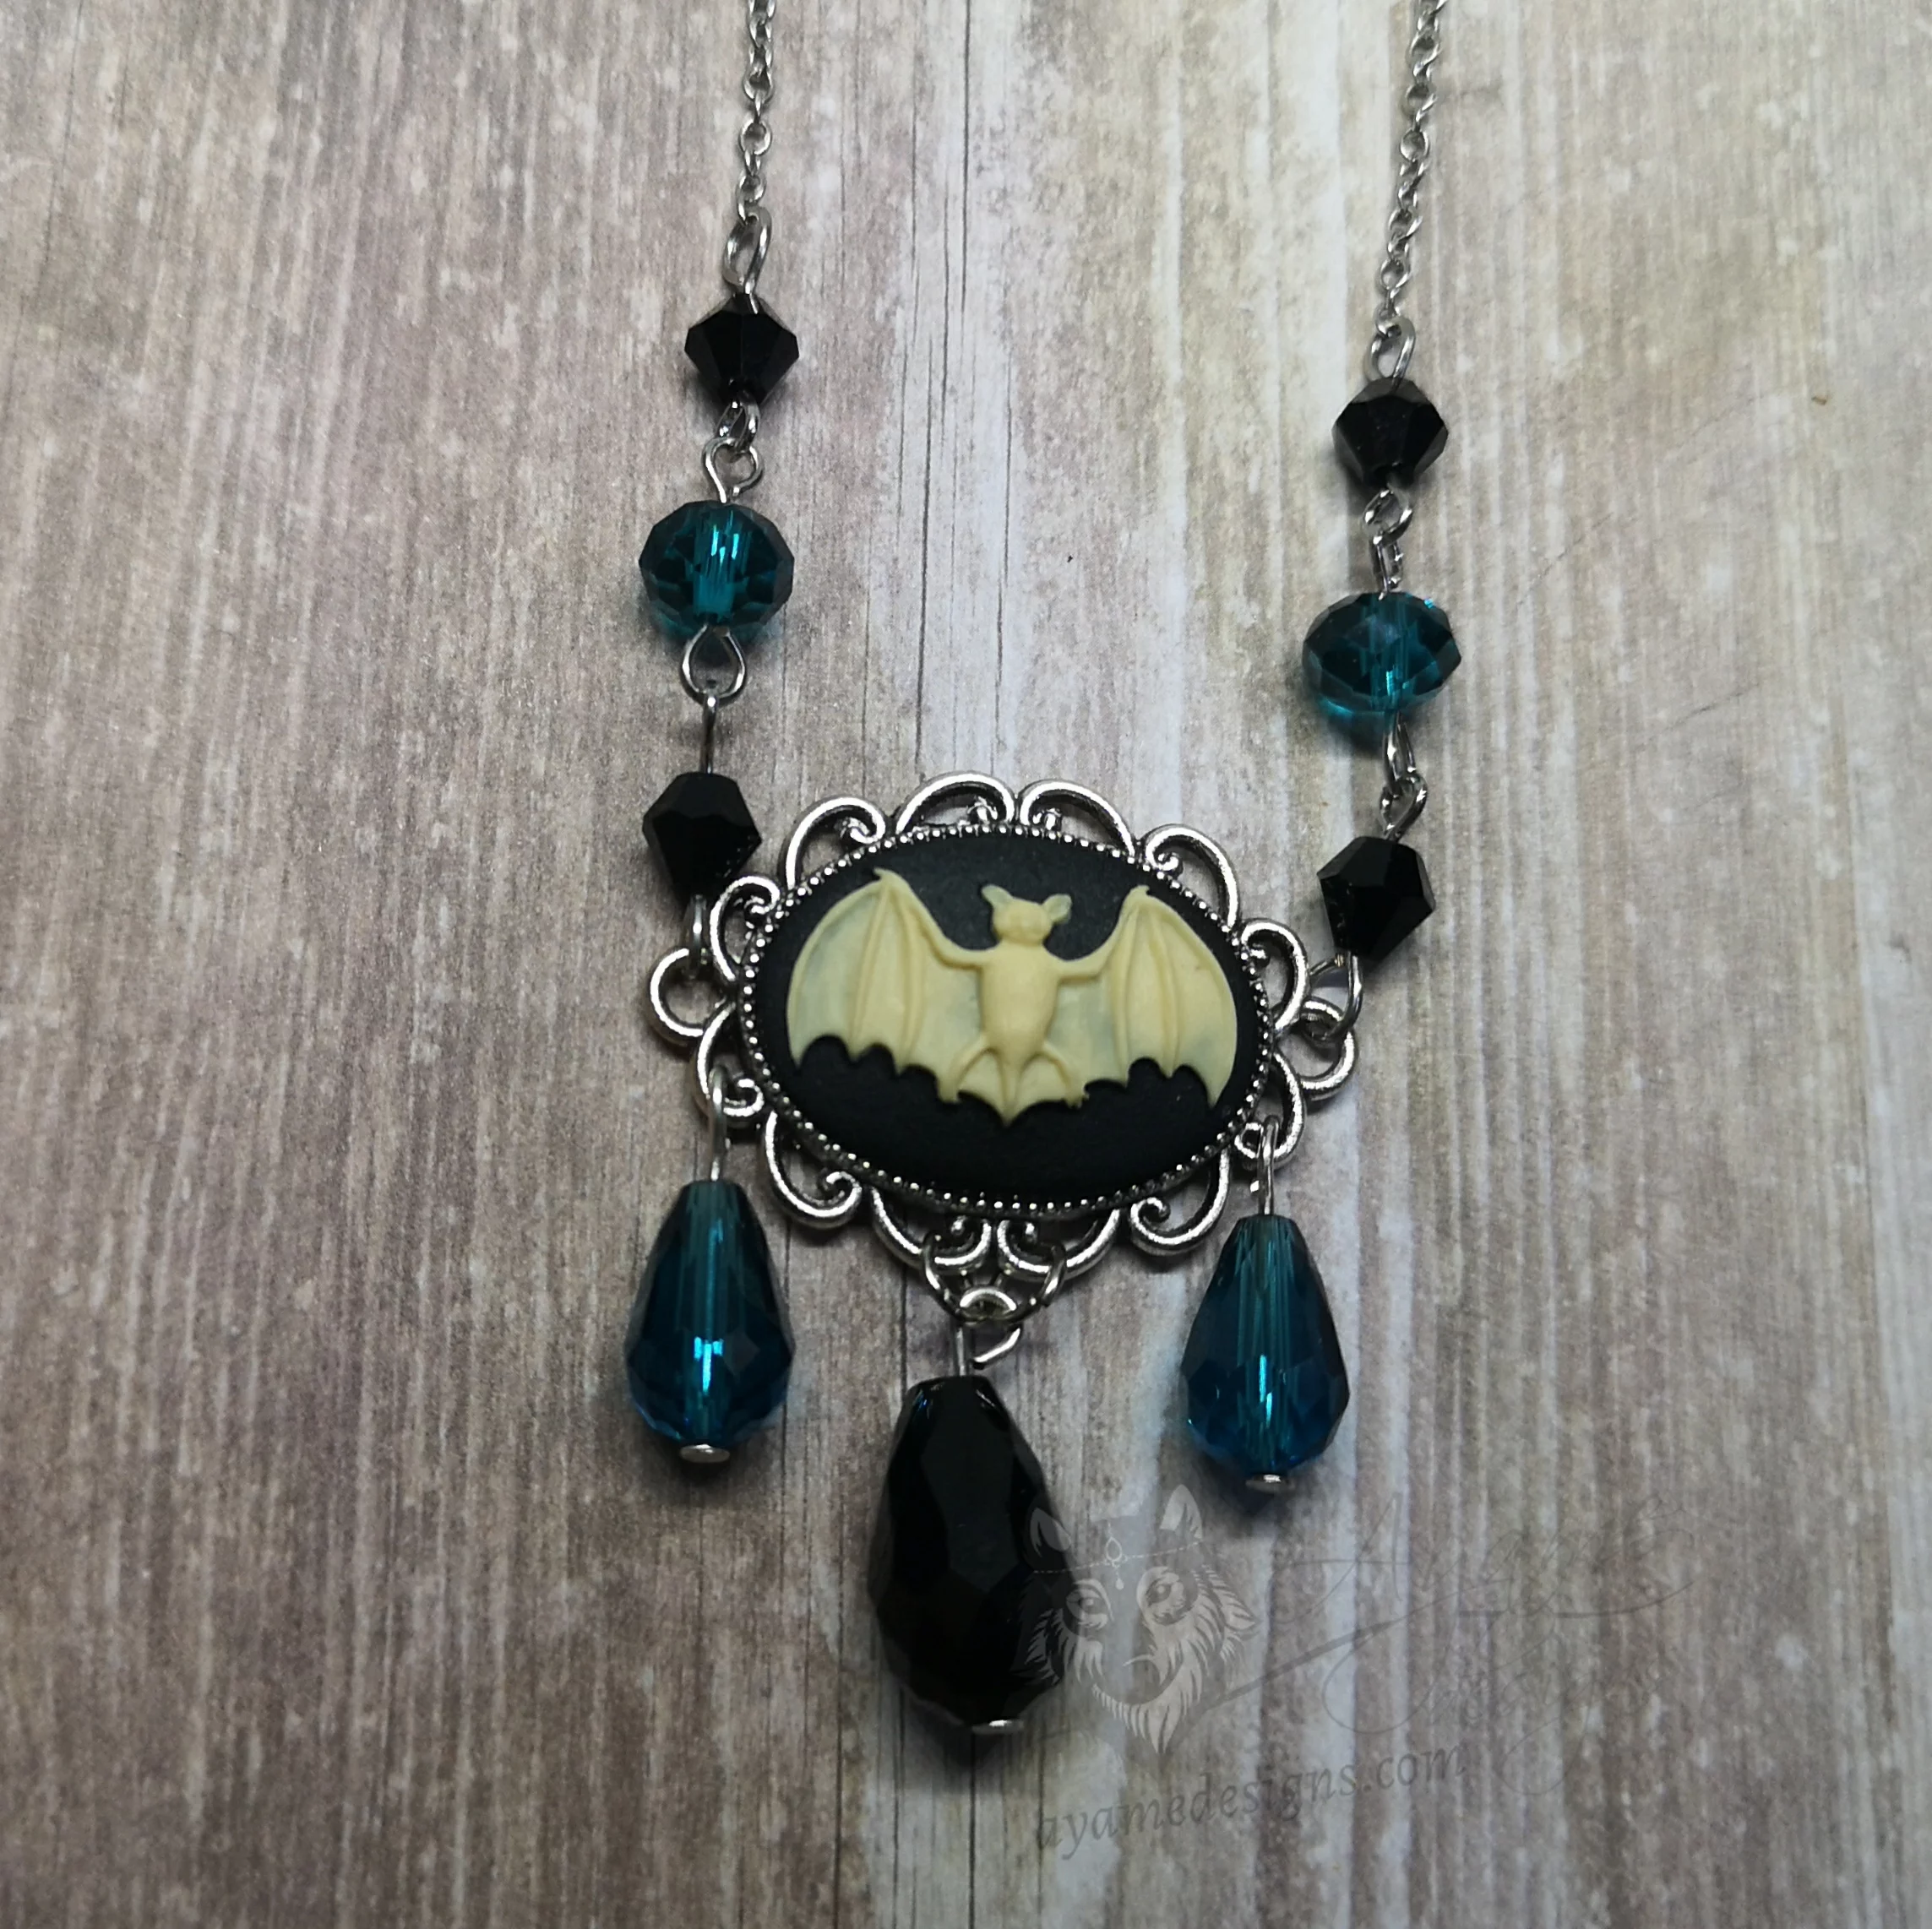 Adjustable gothic necklace with a bat cameo in a filigree frame, with black and teal Austrian crystal beads and stainless steel chain